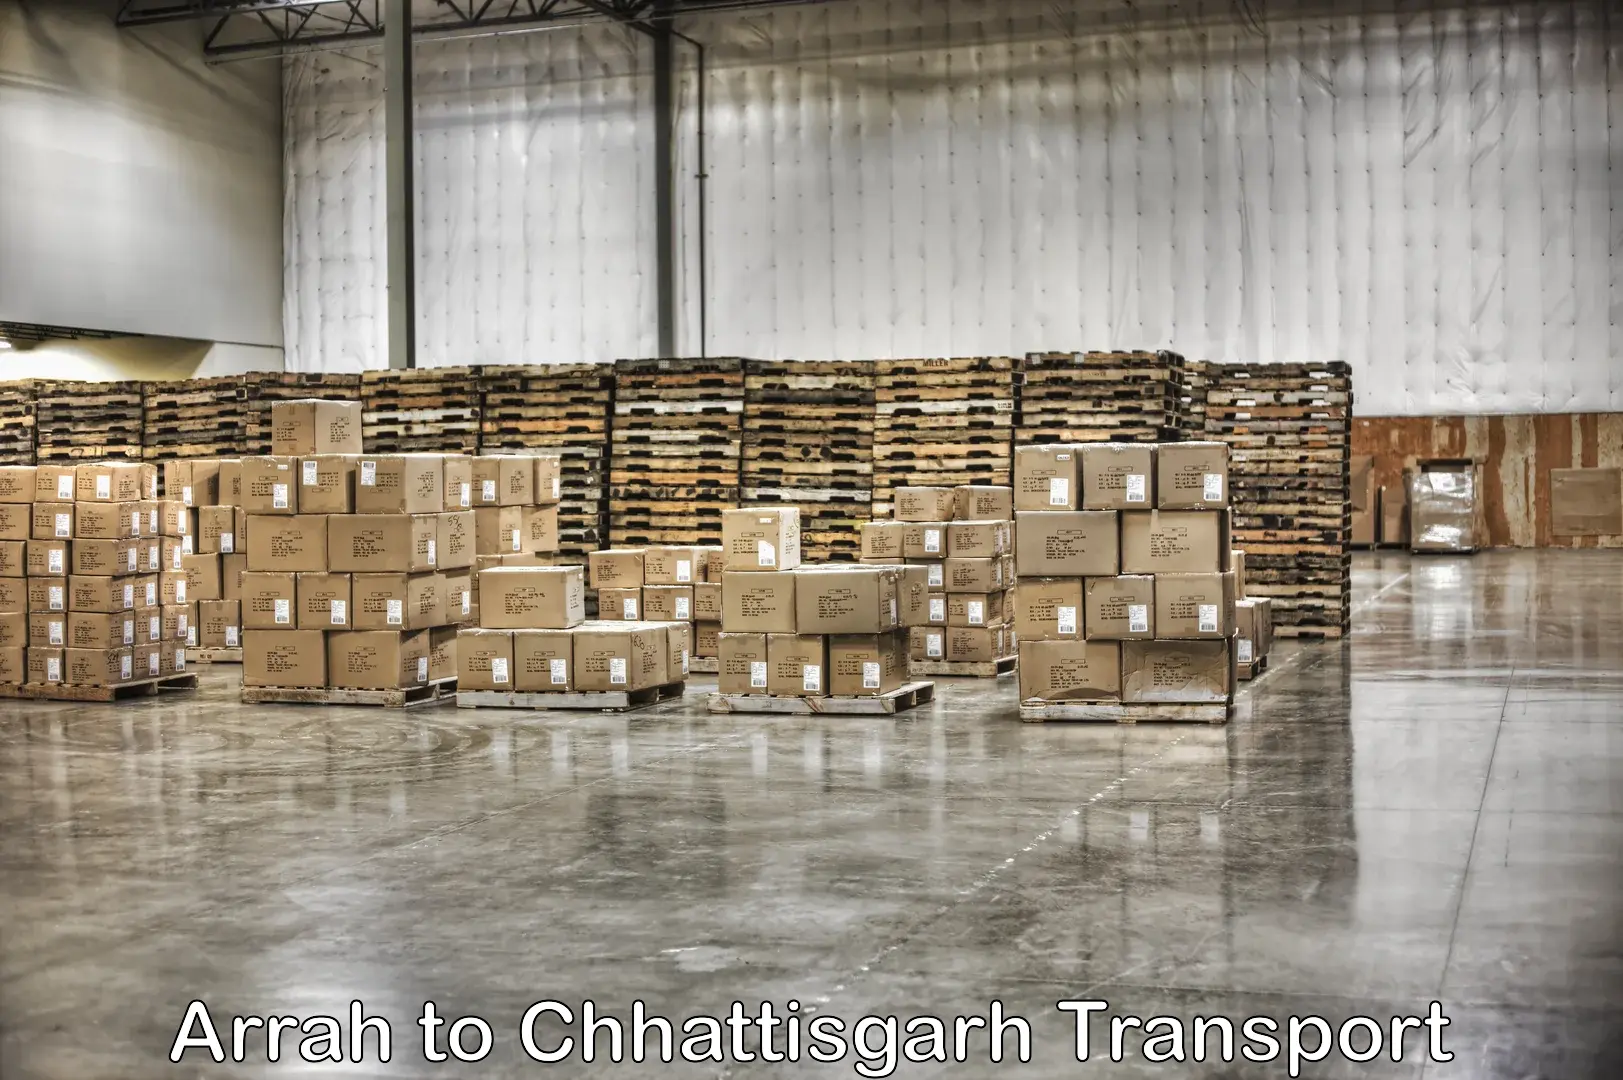 Truck transport companies in India Arrah to bagbahra